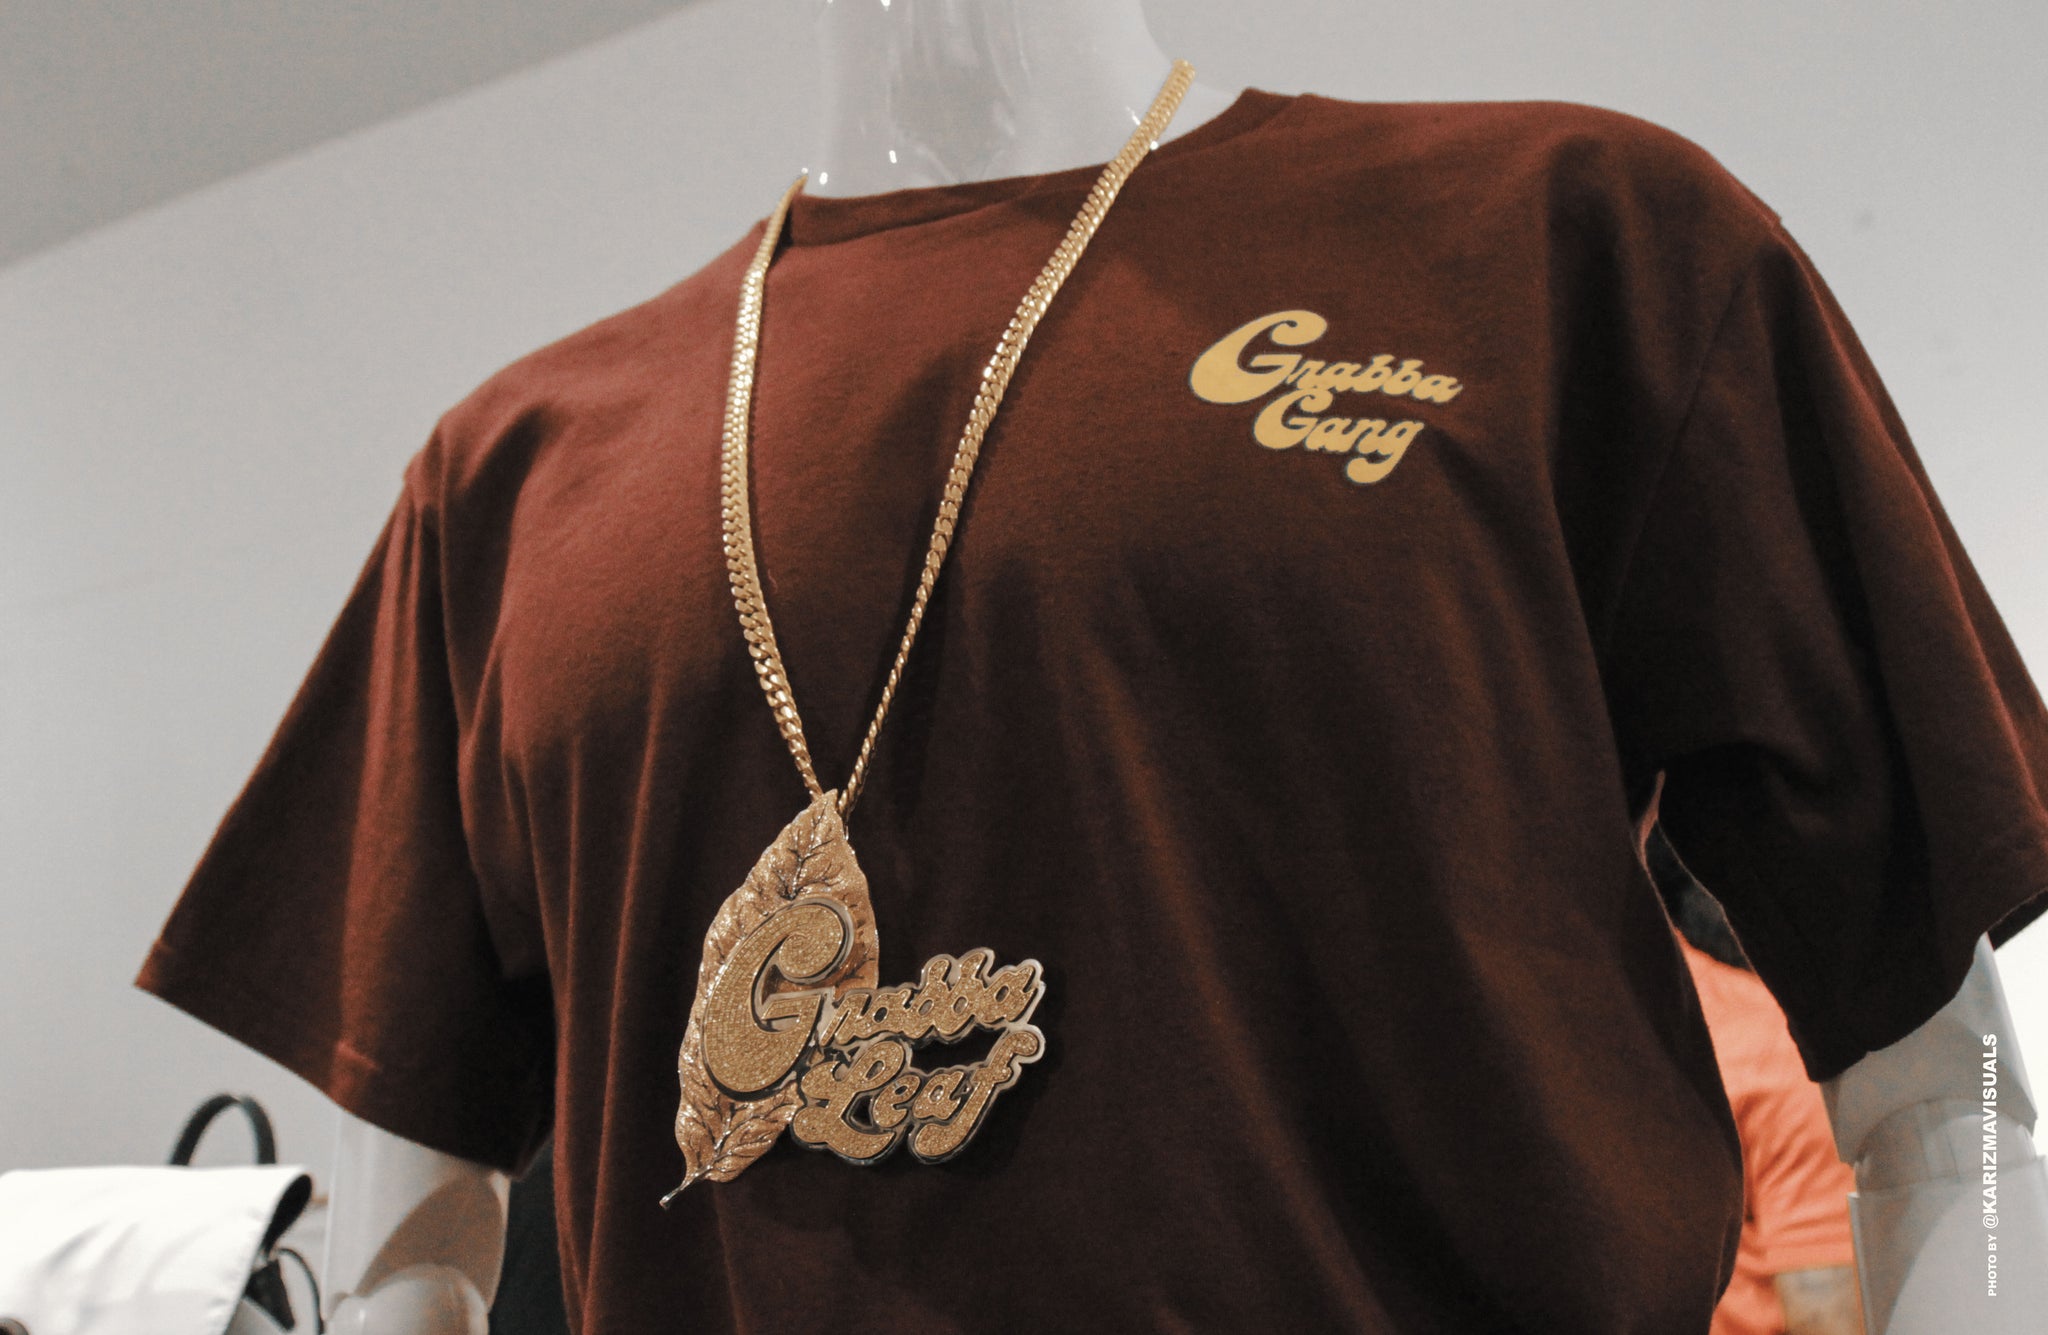 Grabba Leaf Releases New Merch At The No Comply Pop-Up Shop